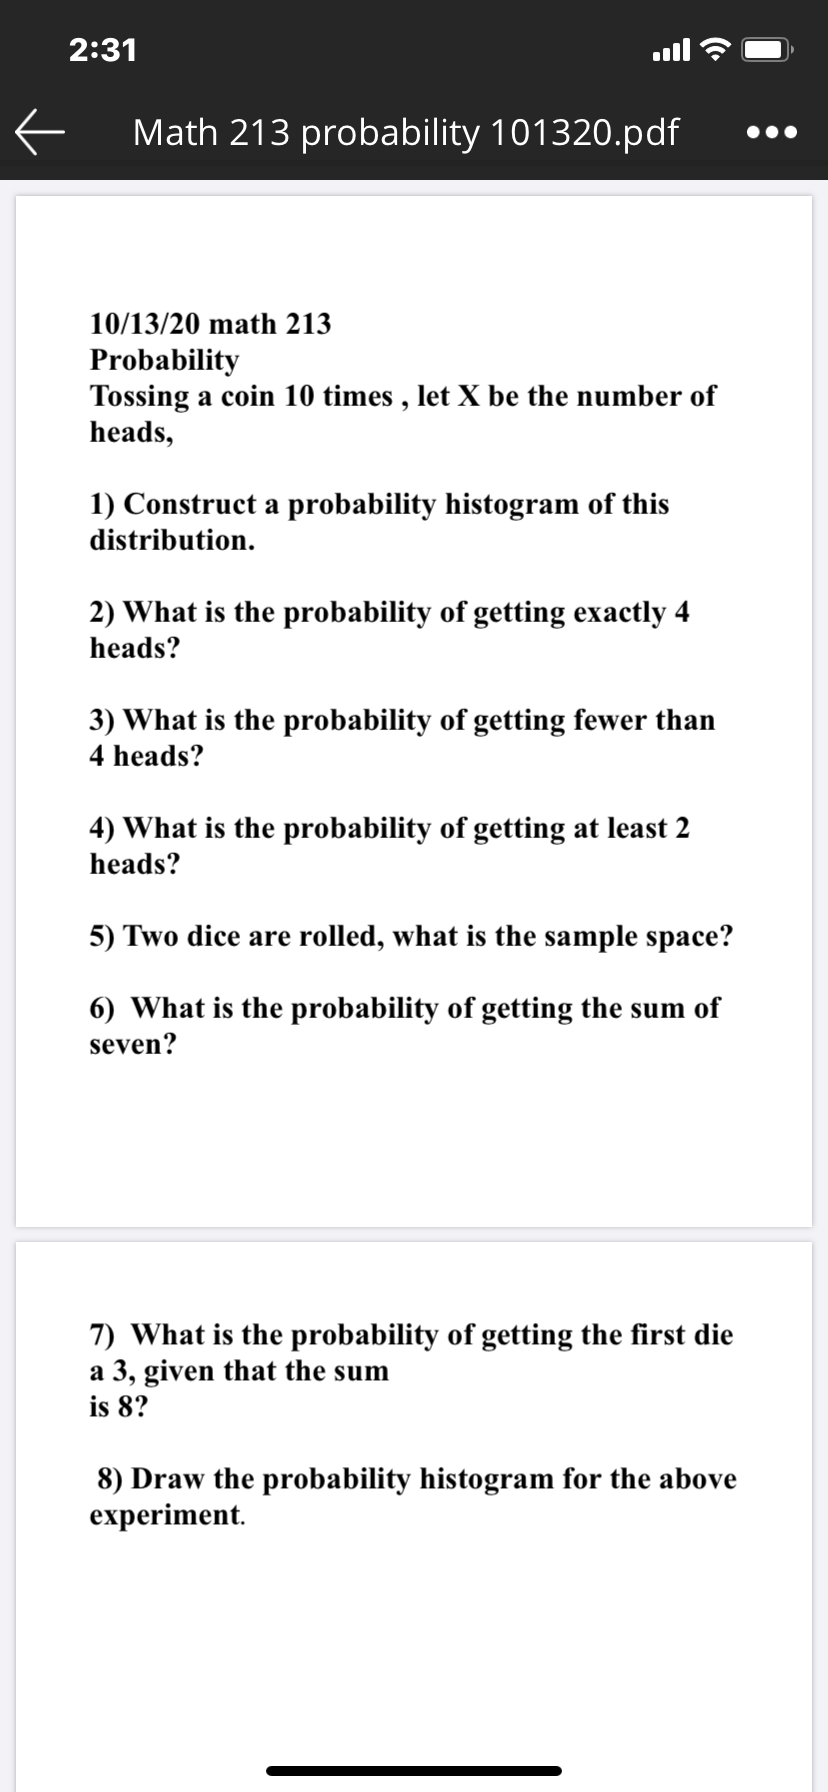 2:31
Math 213 probability 101320.pdf
10/13/20 math 213
Probability
Tossing a coin 10 times , let X be the number of
heads,
1) Construct a probability histogram of this
distribution.
2) What is the probability of getting exactly 4
heads?
3) What is the probability of getting fewer than
4 heads?
4) What is the probability of getting at least 2
heads?
5) Two dice are rolled, what is the sample space?
6) What is the probability of getting the sum of
seven?
7) What is the probability of getting the first die
a 3, given that the sum
is 8?
8) Draw the probability histogram for the above
experiment.
